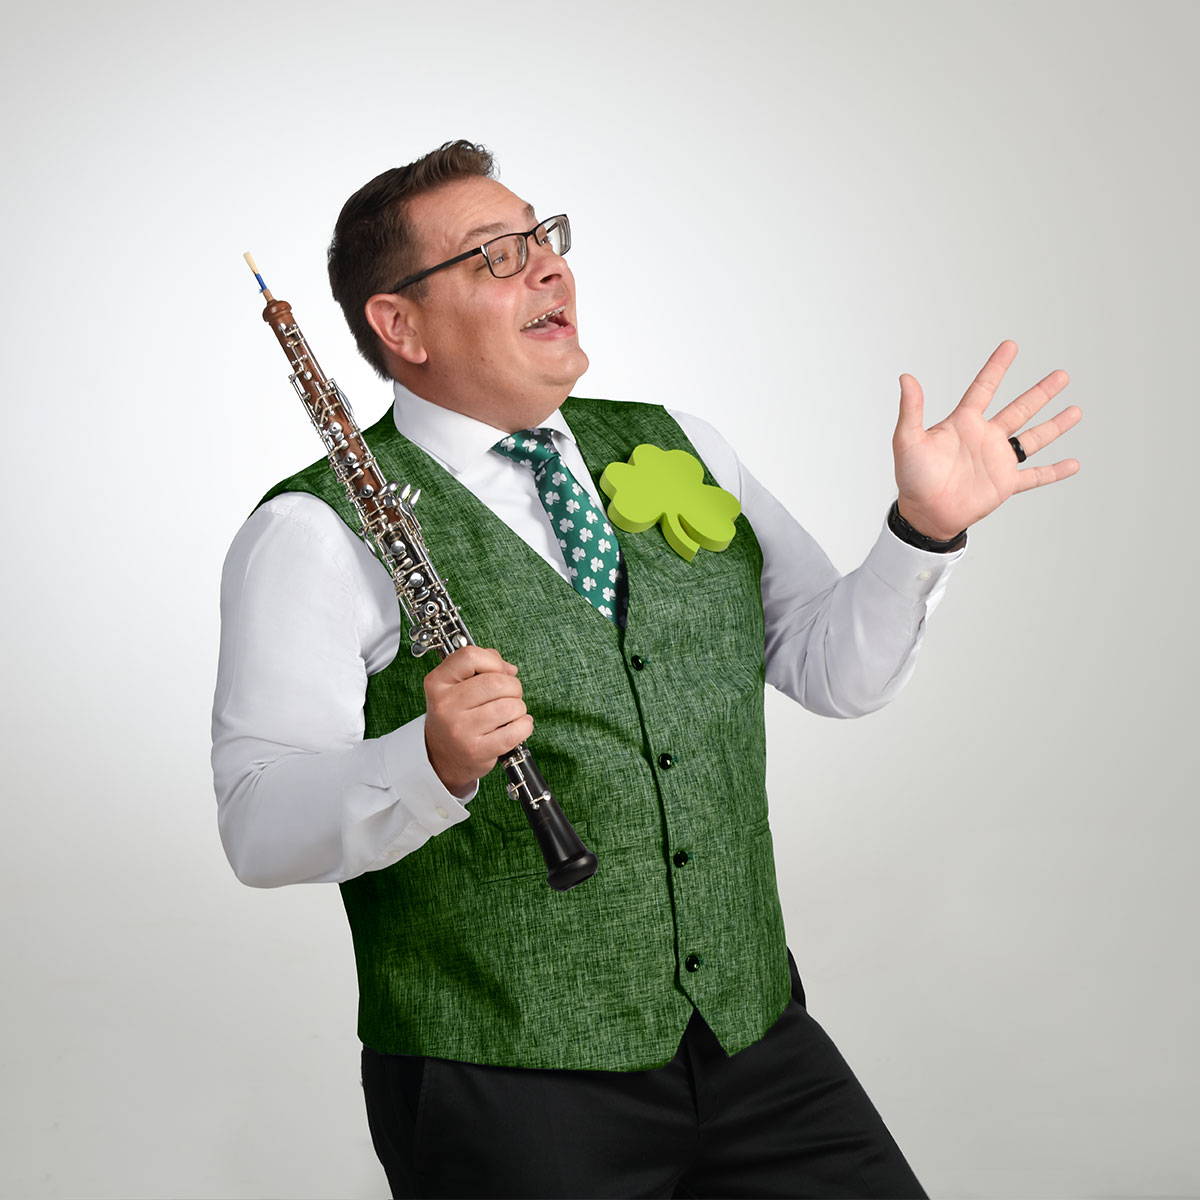 Oboist Nicholas Arbolino with a green vest and a green clover pin